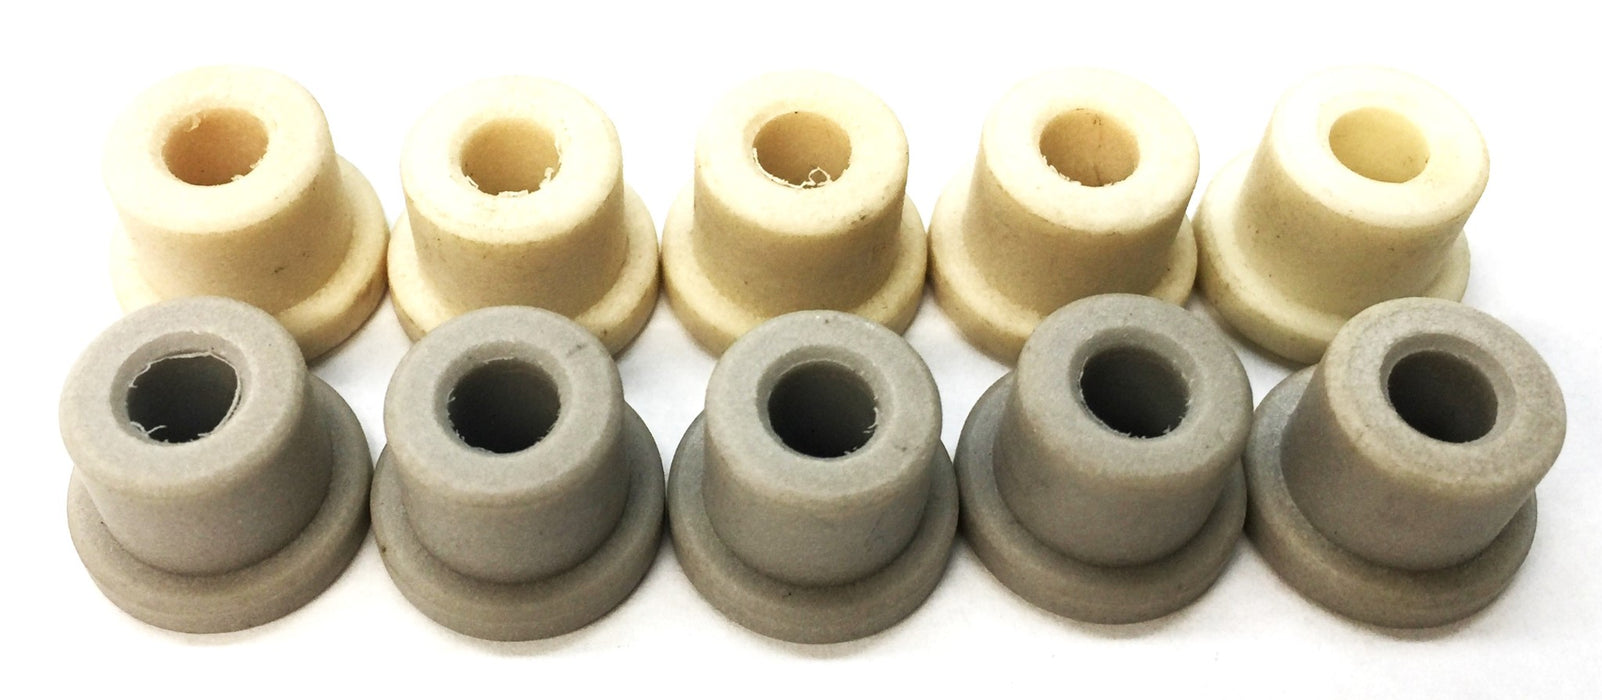 12mm(H)x 12mm(L)x 15mm(Flange dia.)x 5mm(I.D) Teflon Bushing [Lot of 10] NOS